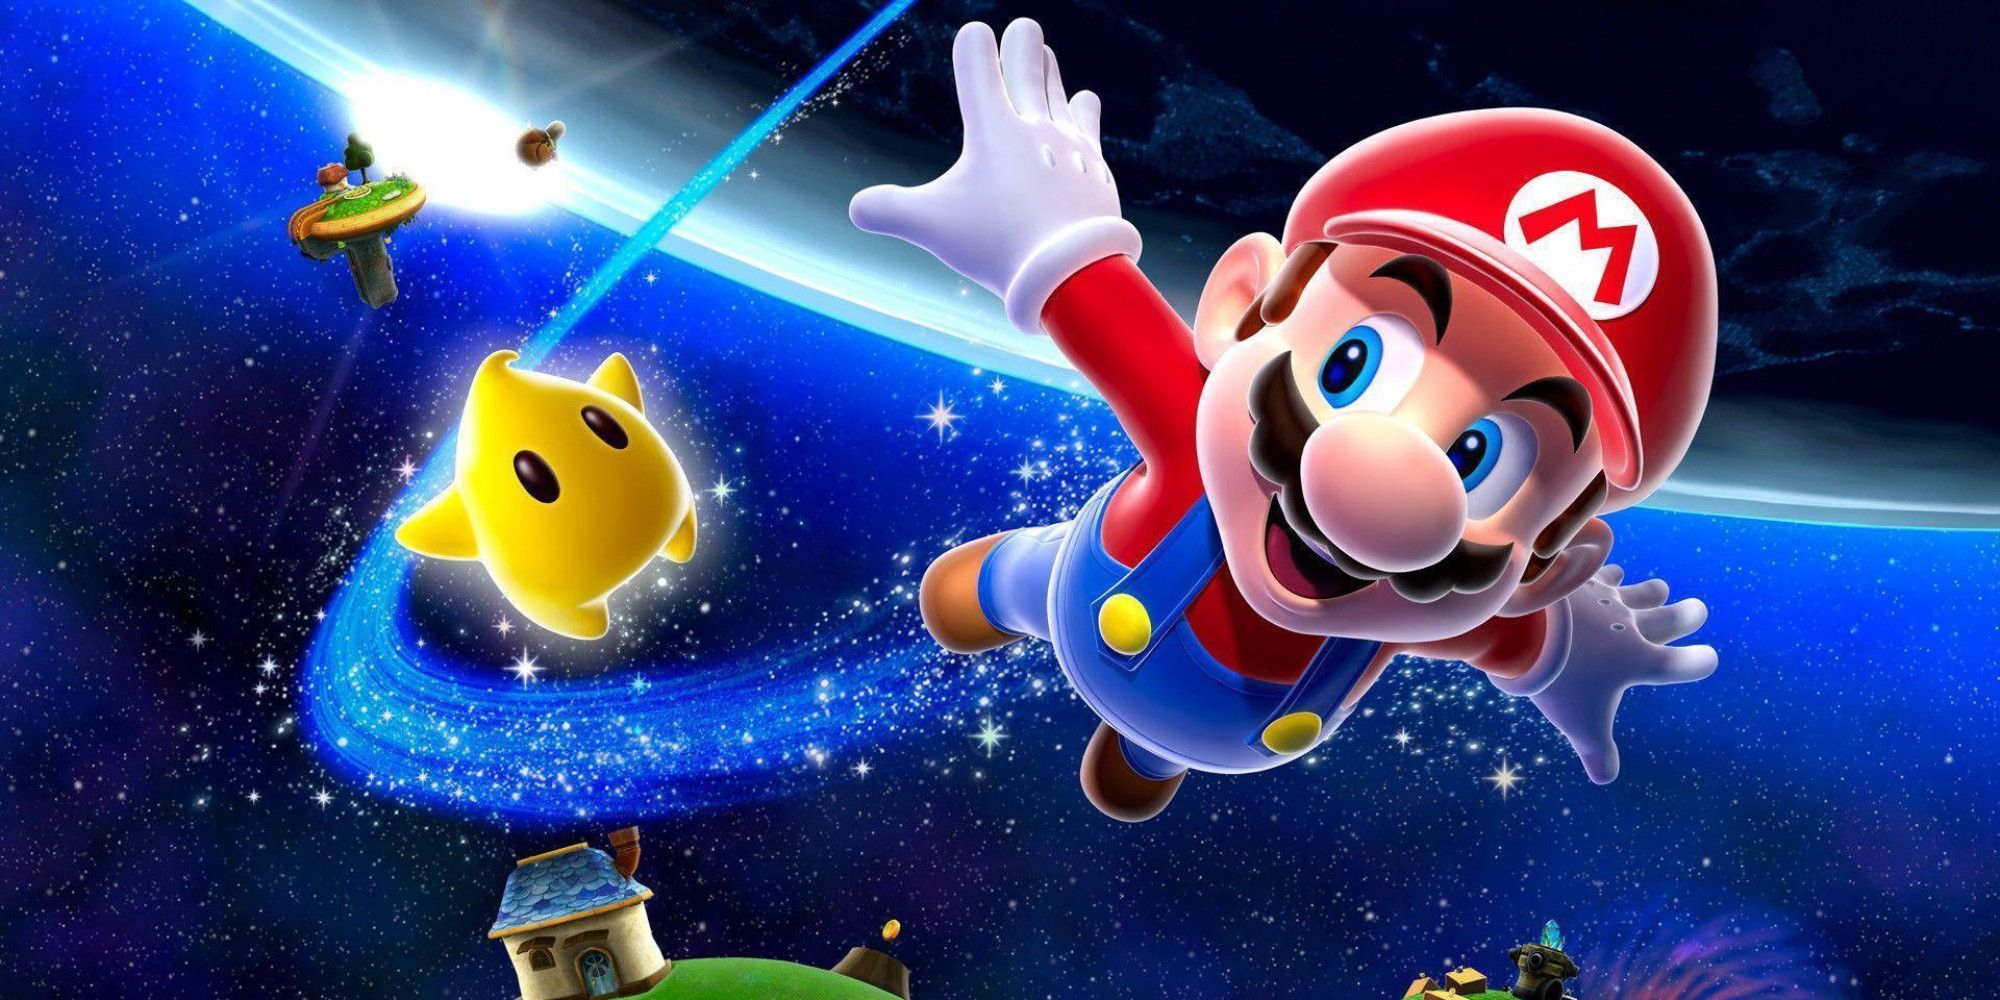 Miyamoto Says He Is "Always" Working On Mario, But Doesn’t Commit To A New Game